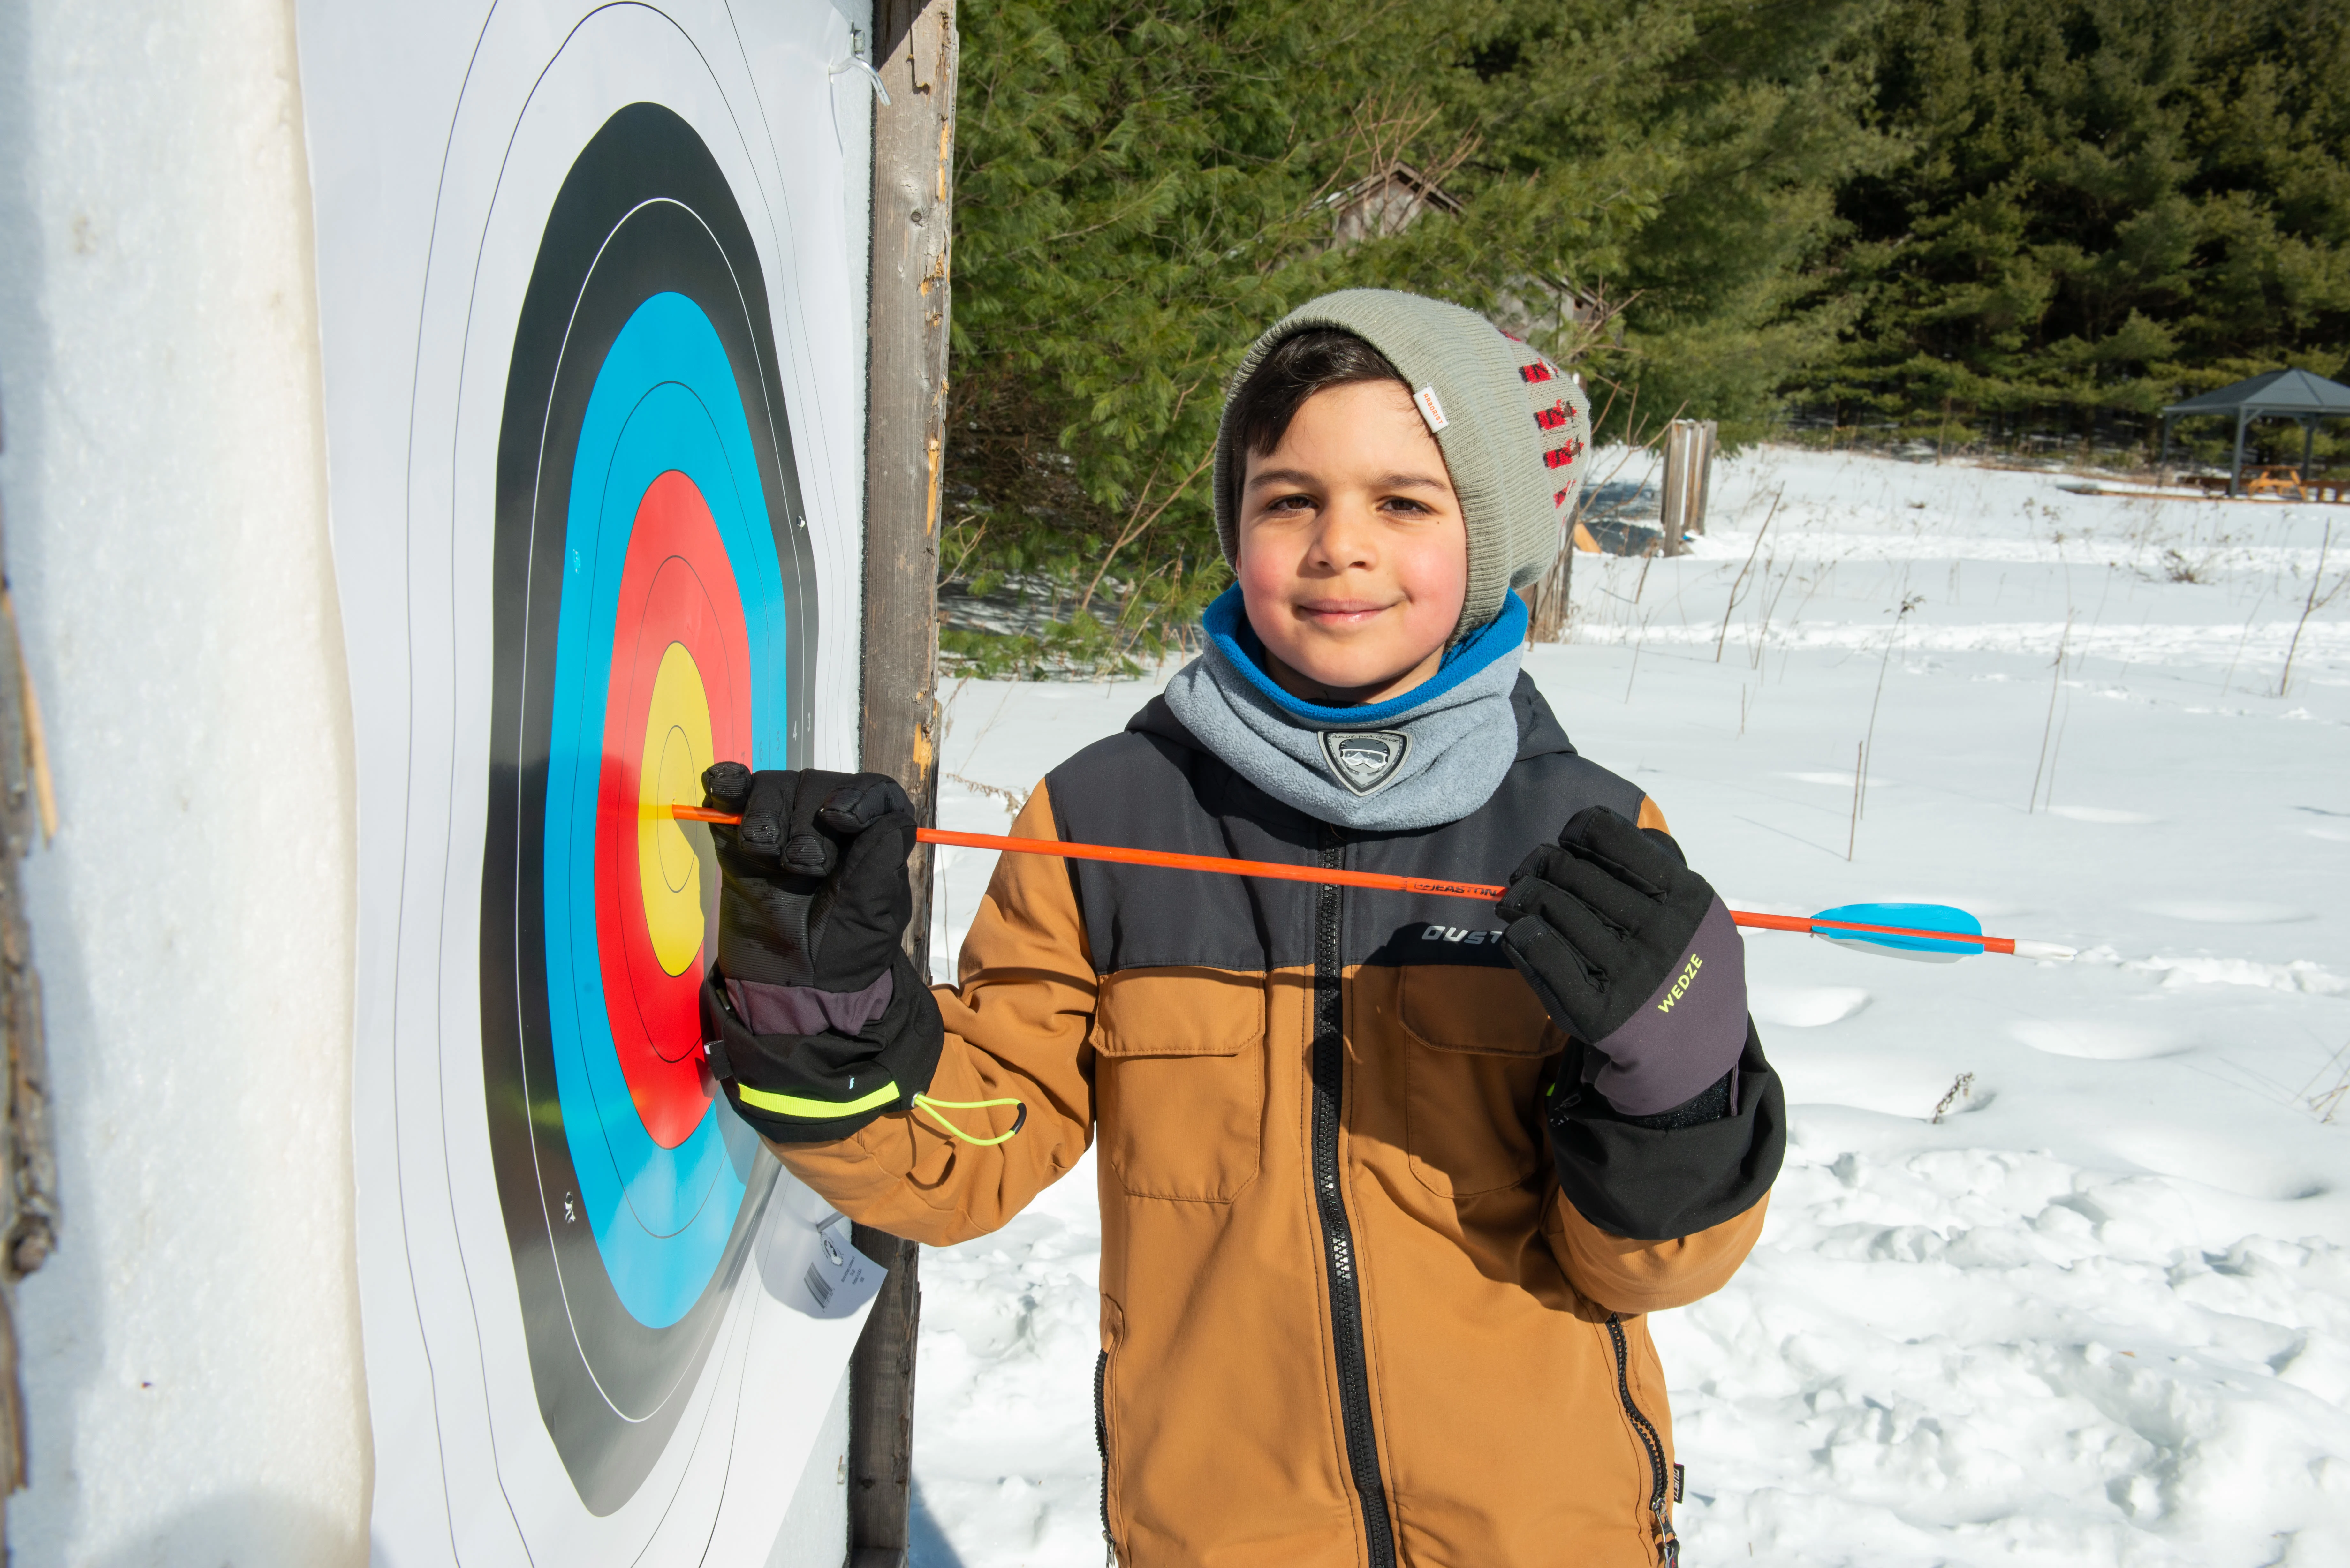 Young camper smiling at camera wearing winter clothing pulling an arrow out of a archery target.  Snow is in the background.